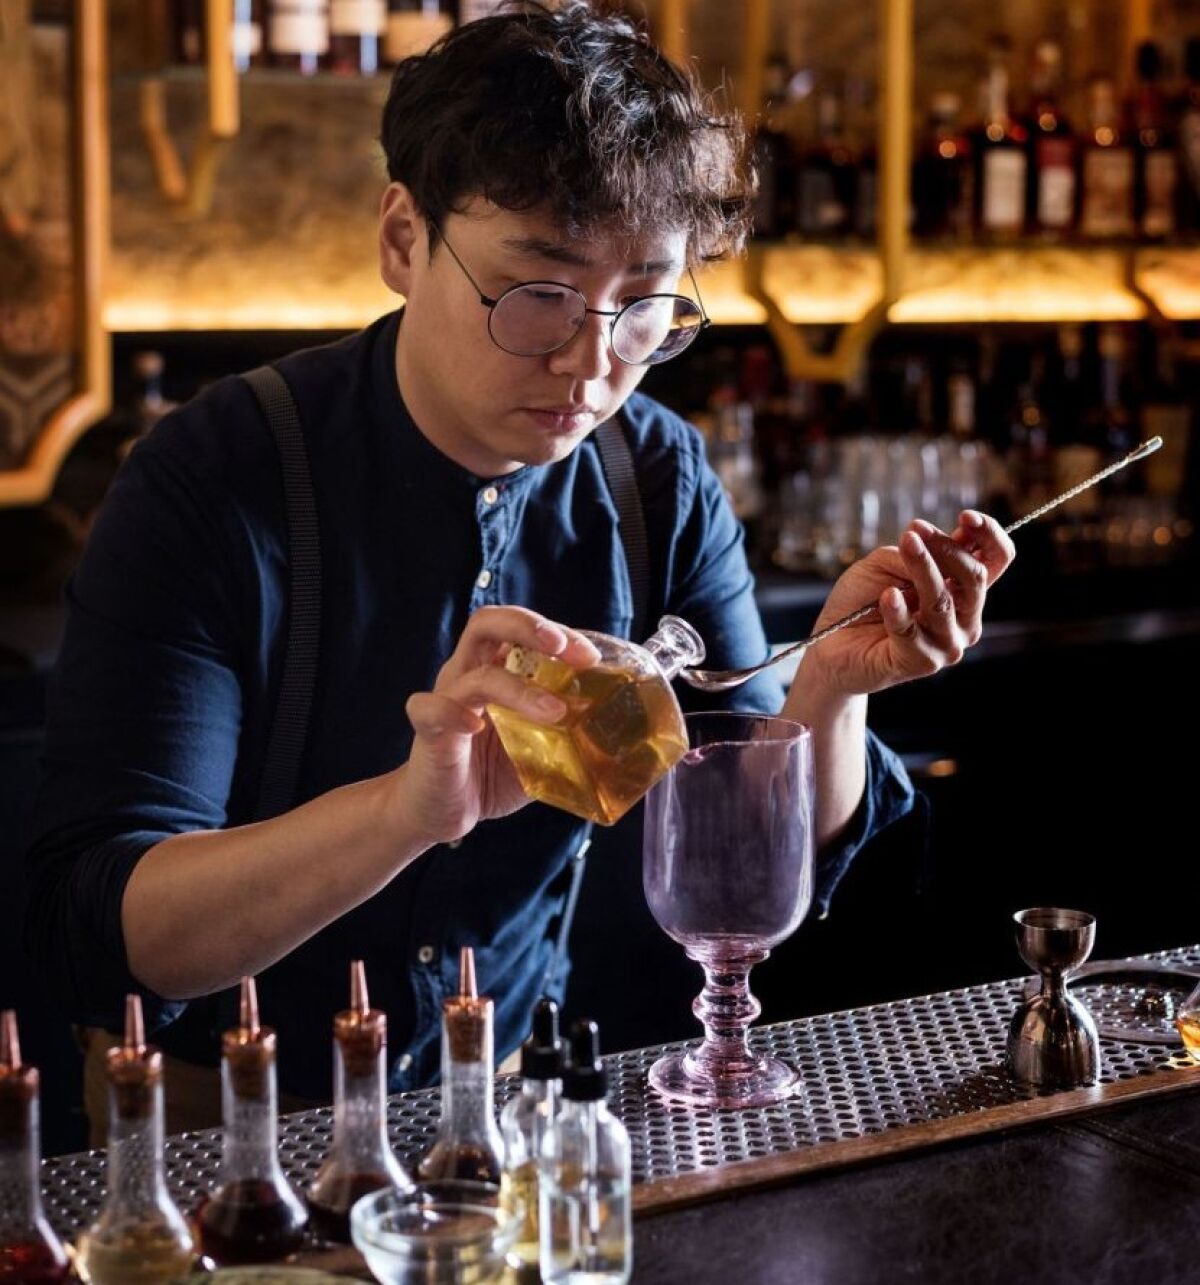 Realm of the 52 Remedies bartender Chris Lee is like a mad scientist, combining high-end spirits with homemade potions to create the innovative cocktails at the Convoy Street speakeasy. Many of Lee's flavor profiles are inspired by his upbringing in Korea. 